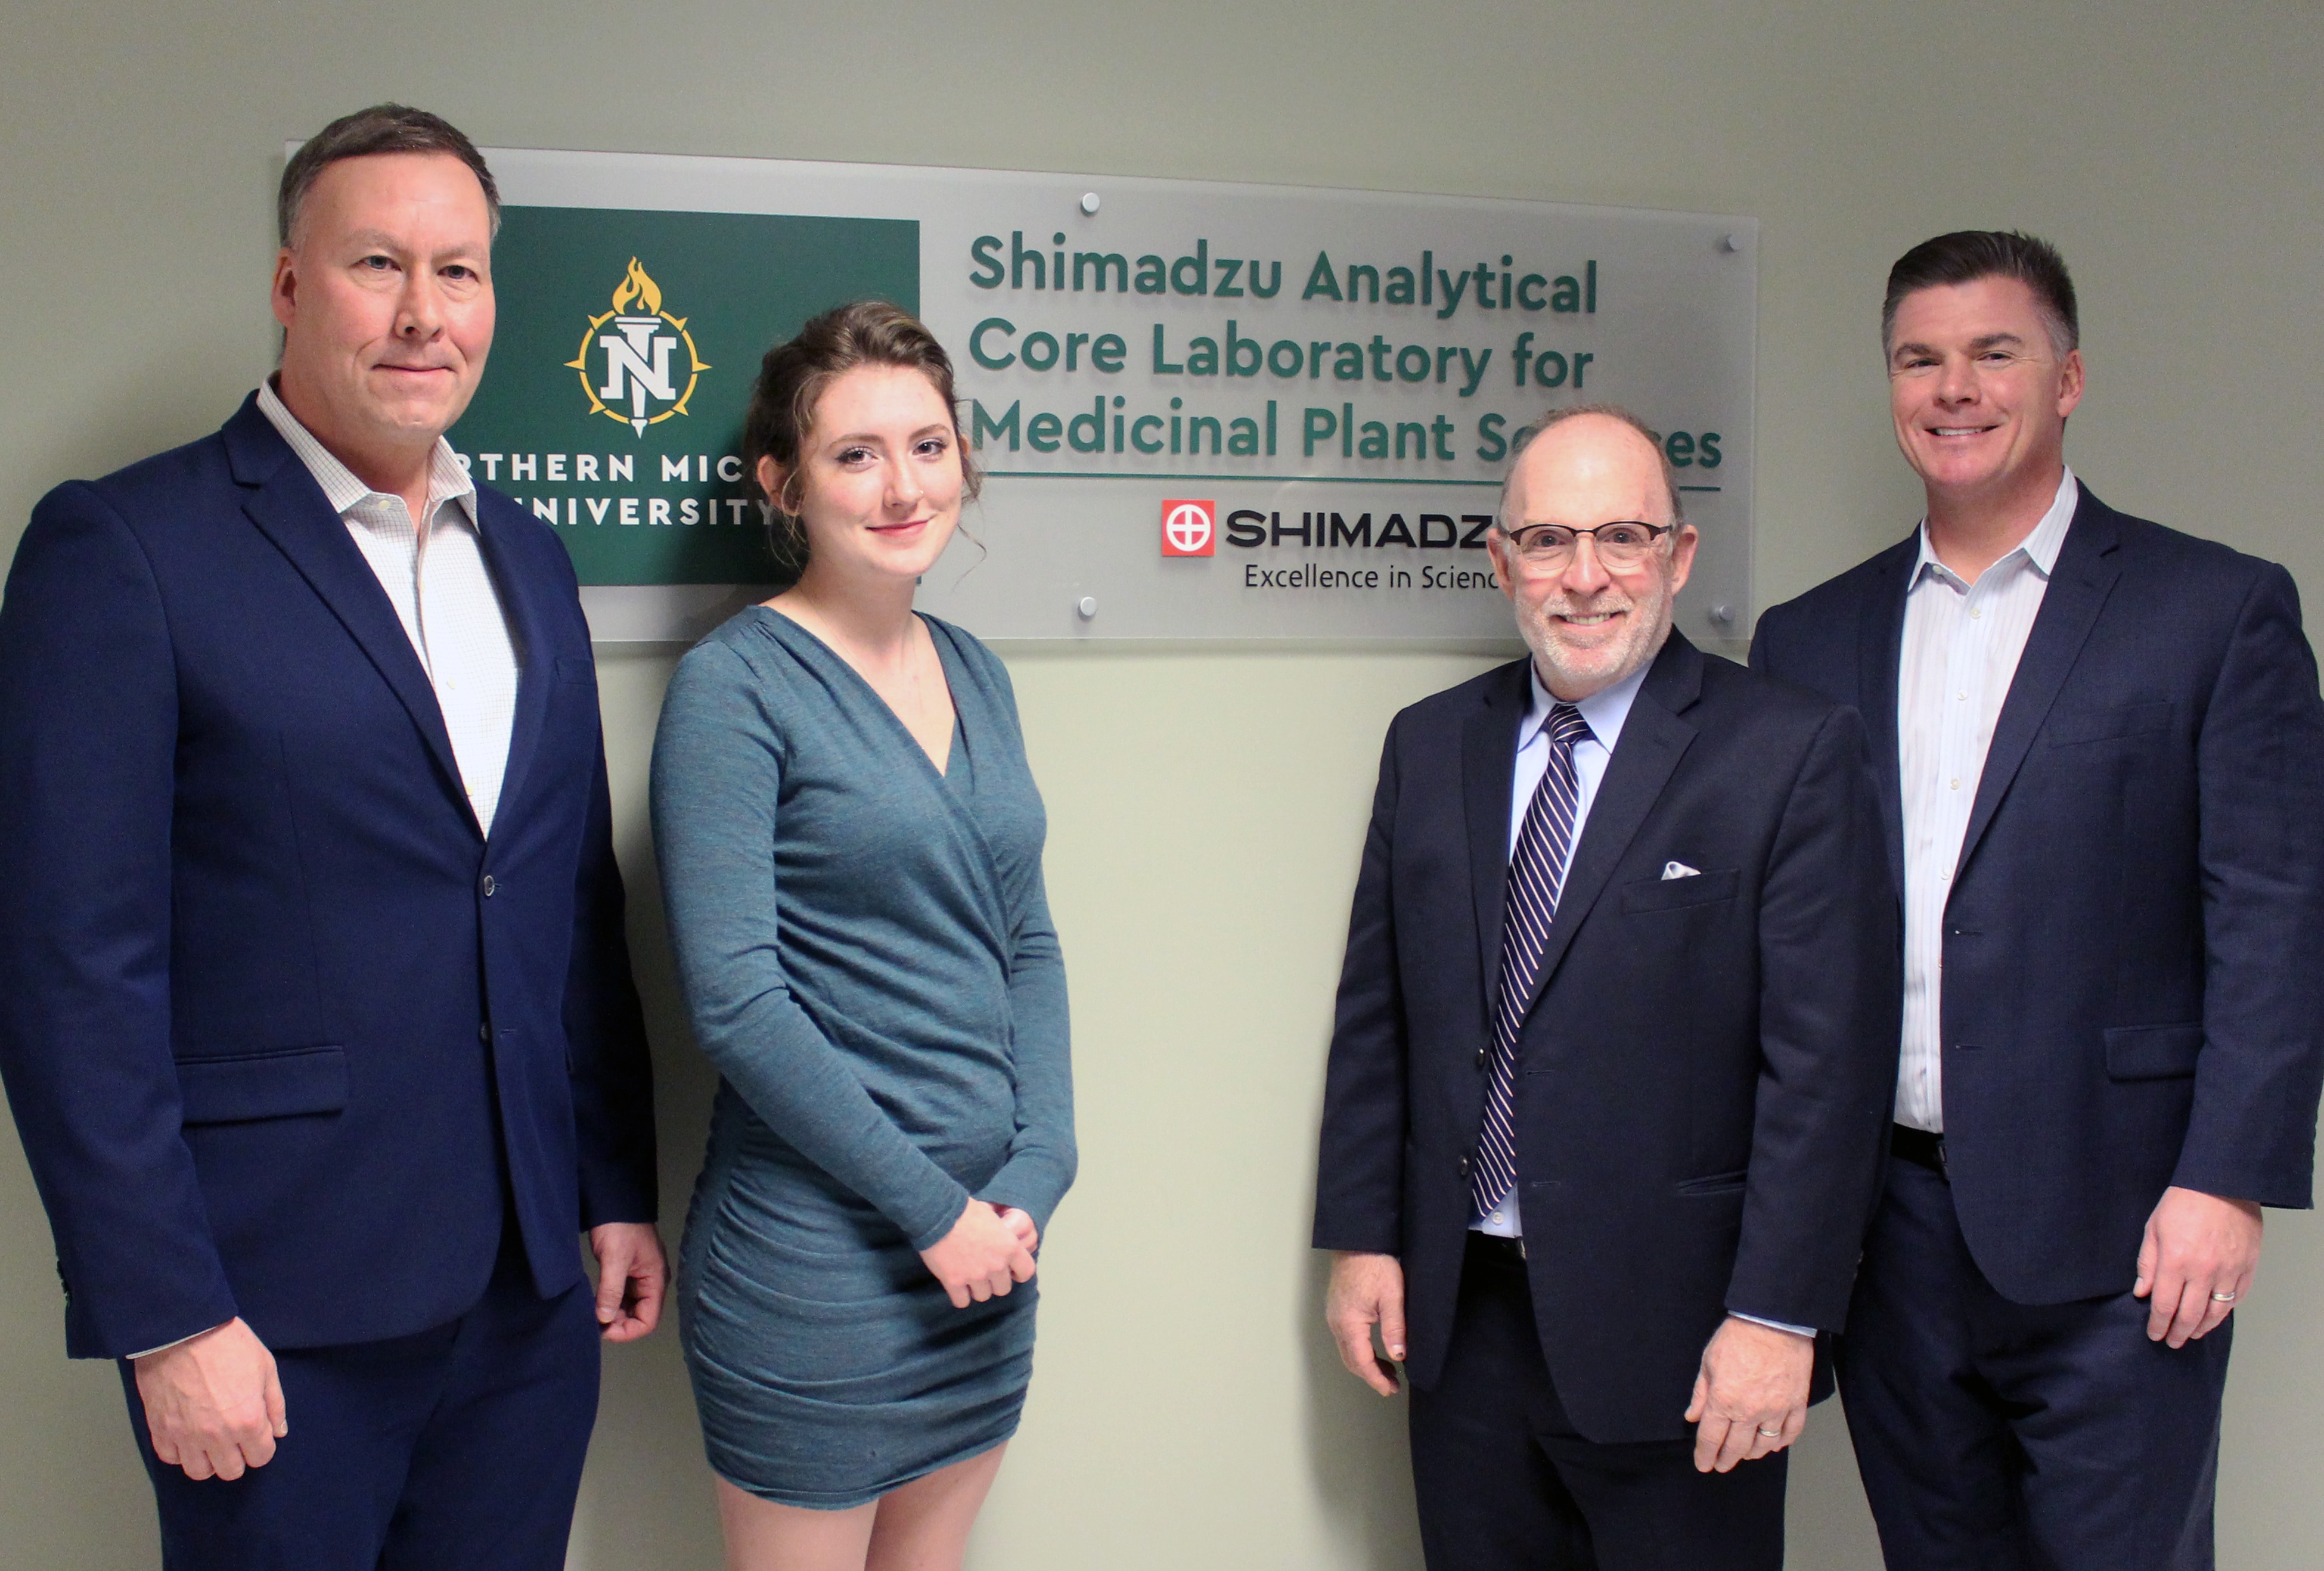 Dedication of Shimadzu Analytical Core Laboratory for Medicinal Plant Sciences